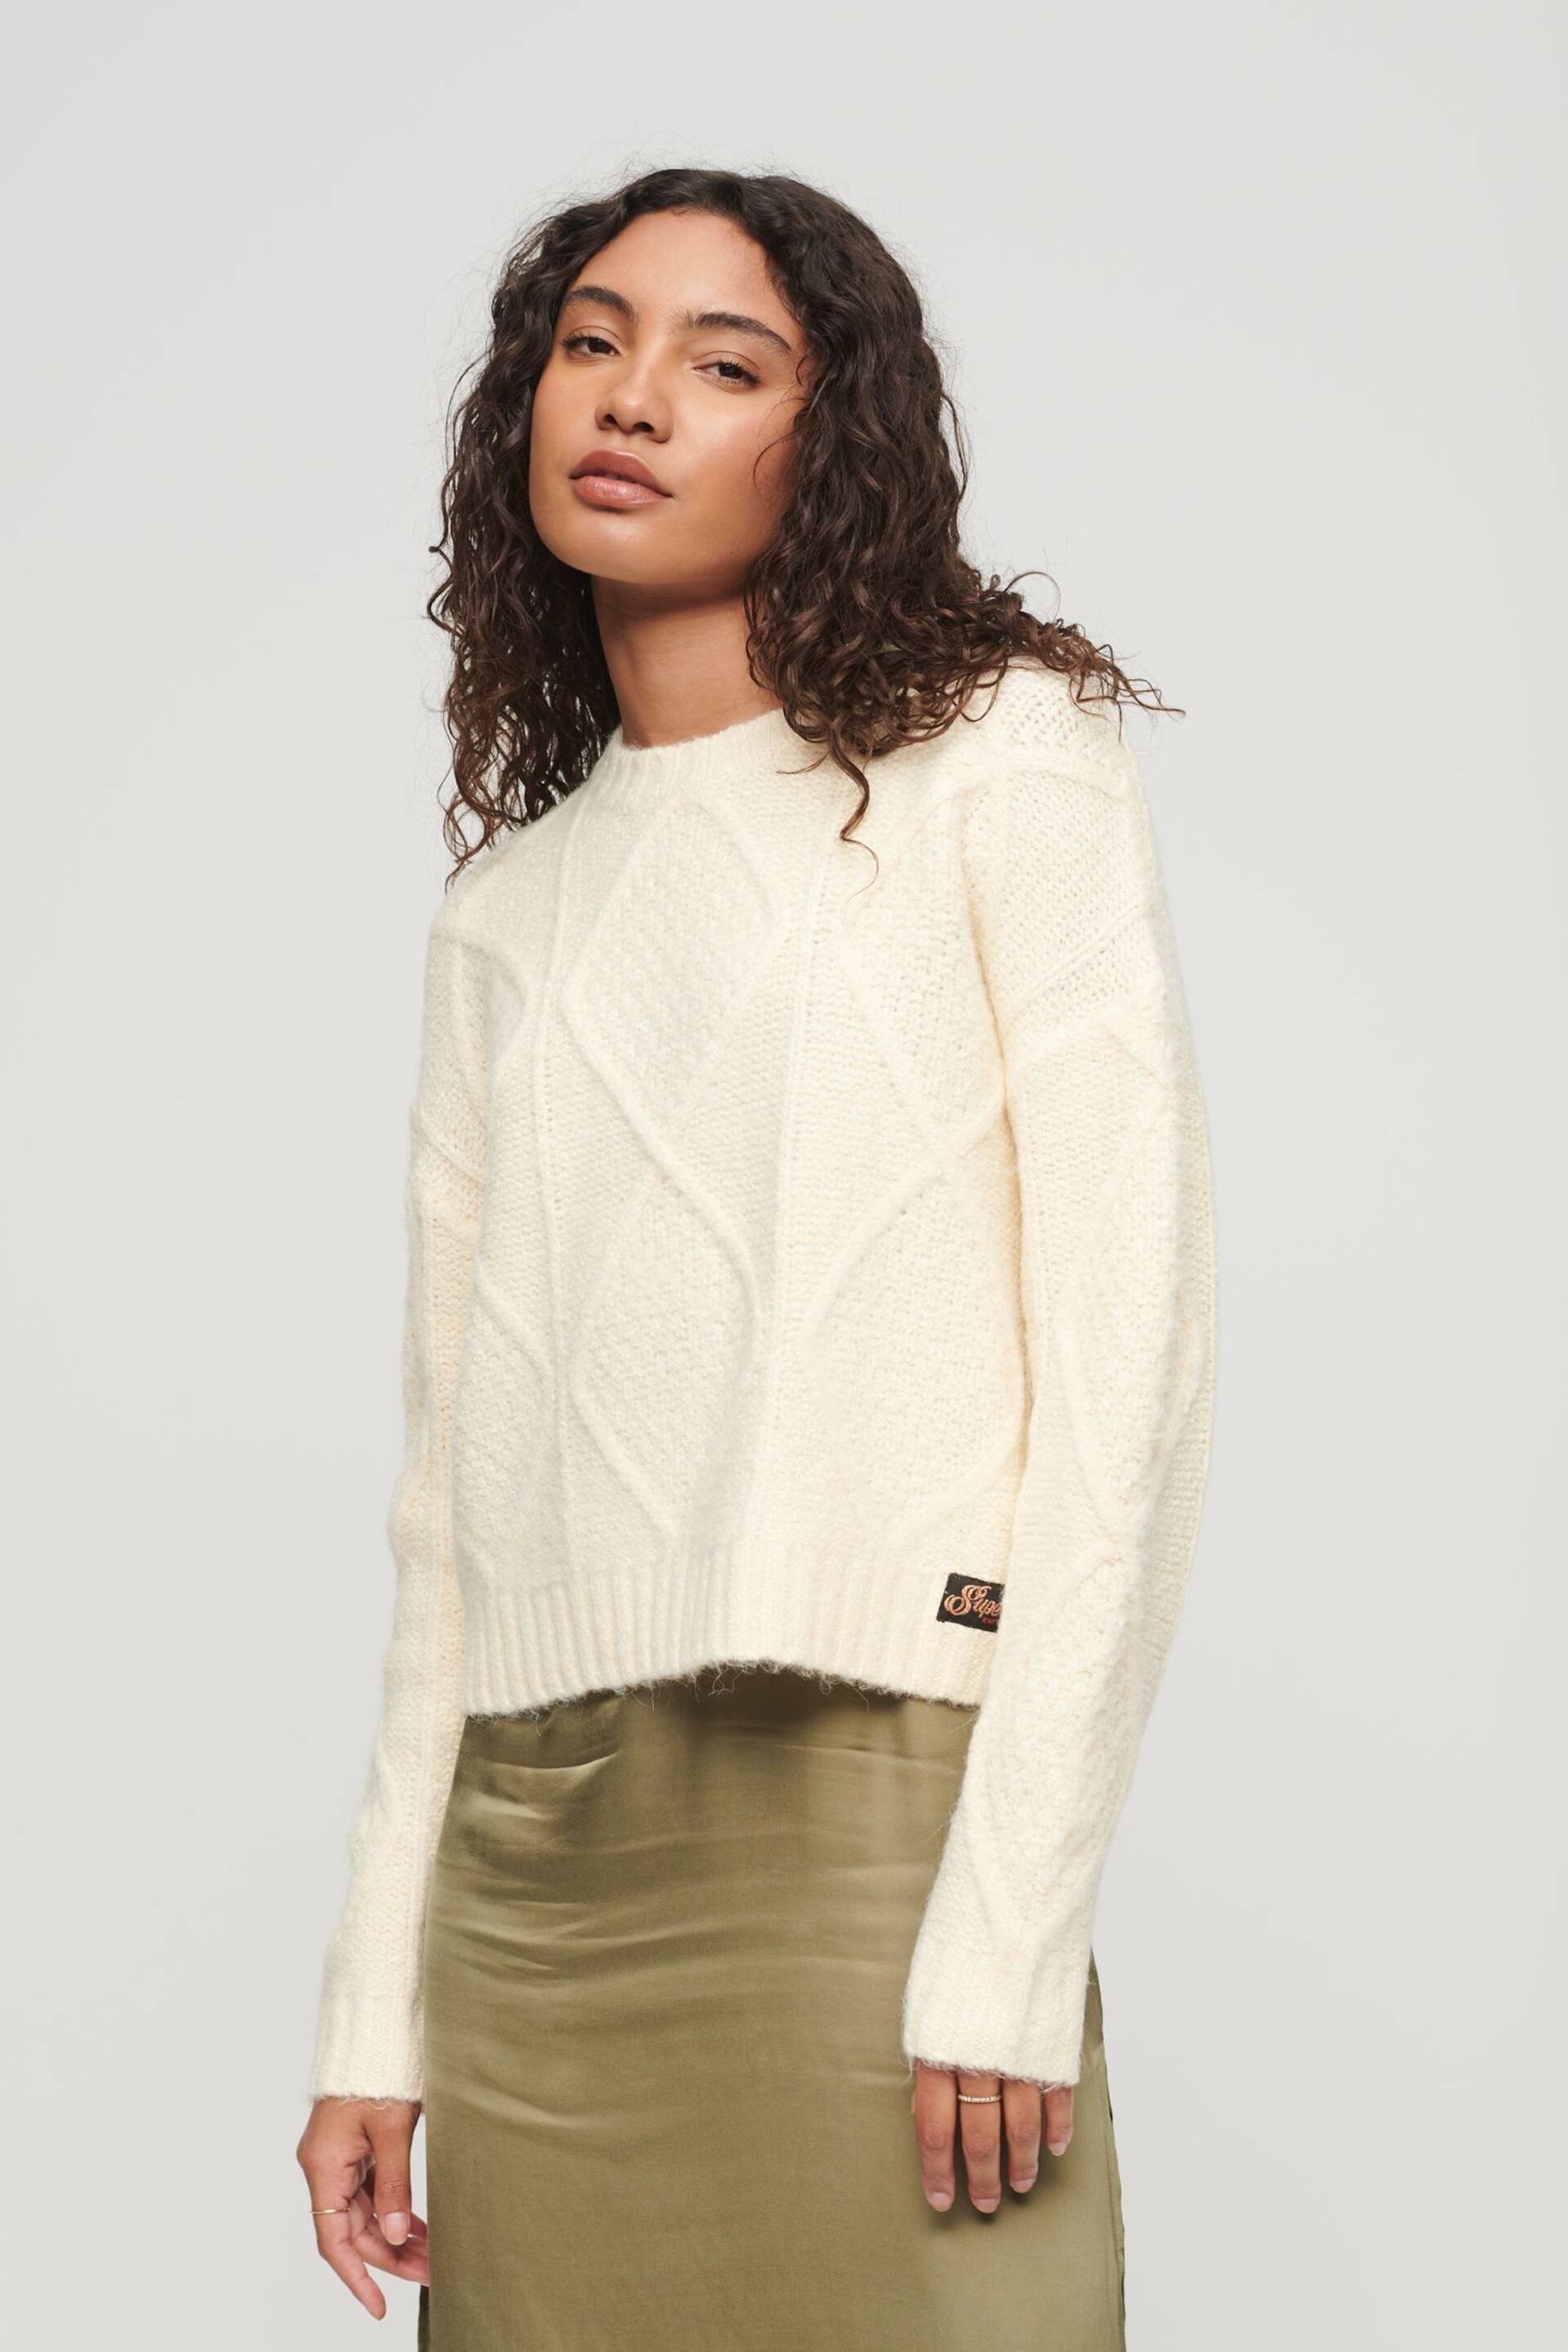 Superdry White Chunky Cable Knitwear Jumper - Image 1 of 6